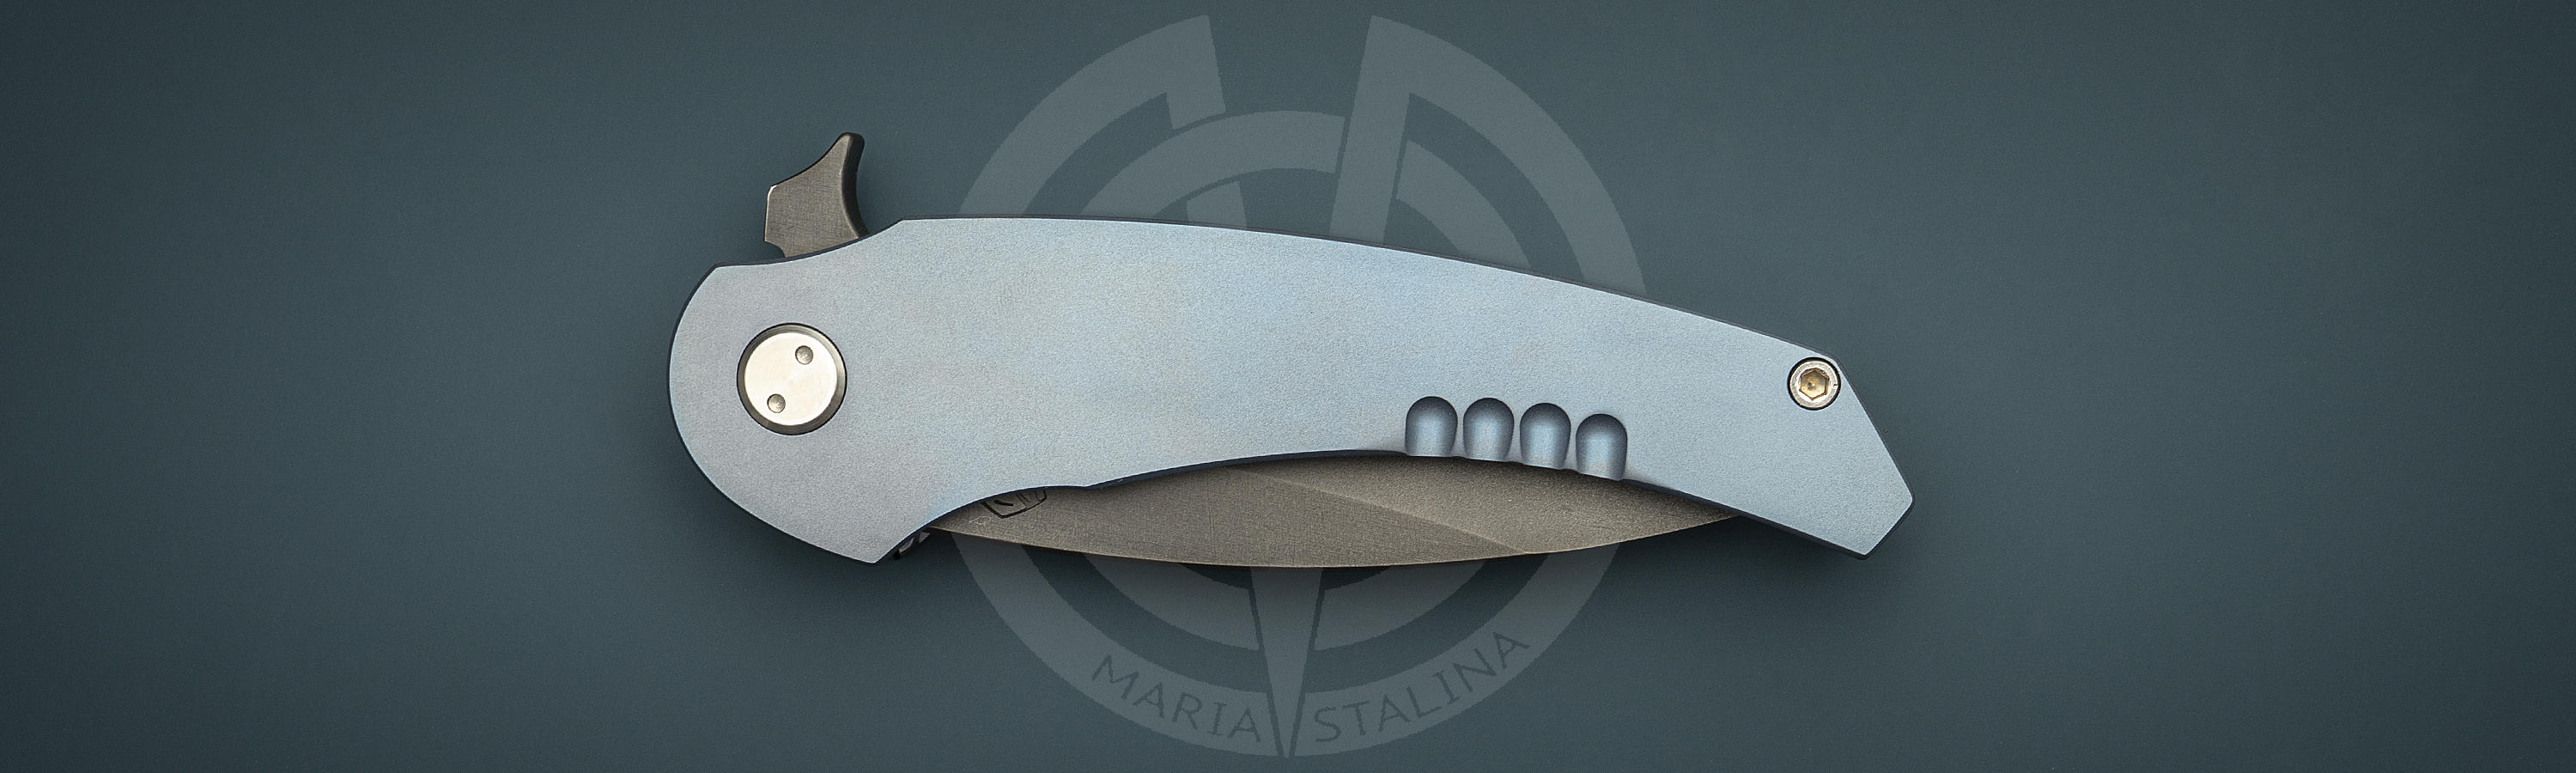 Anodized handle, Stonewashed PVD blade